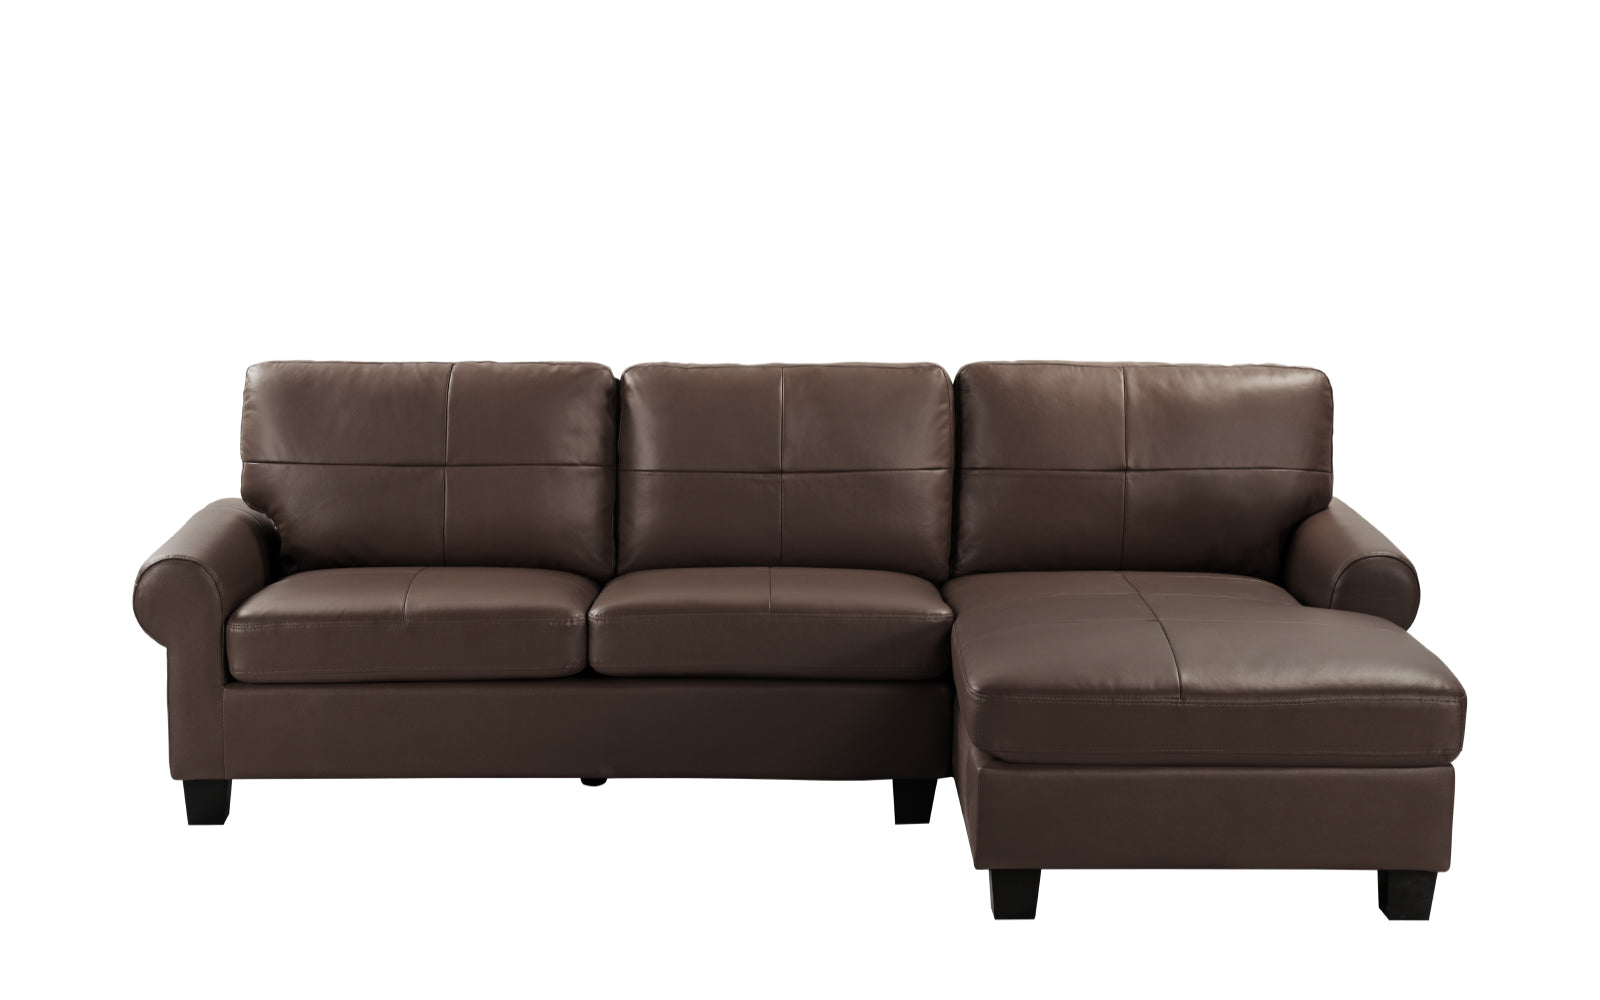 EXP404-DBR Dallas Leather Match Sectional Sofa with Right Fac sku EXP404-DBR